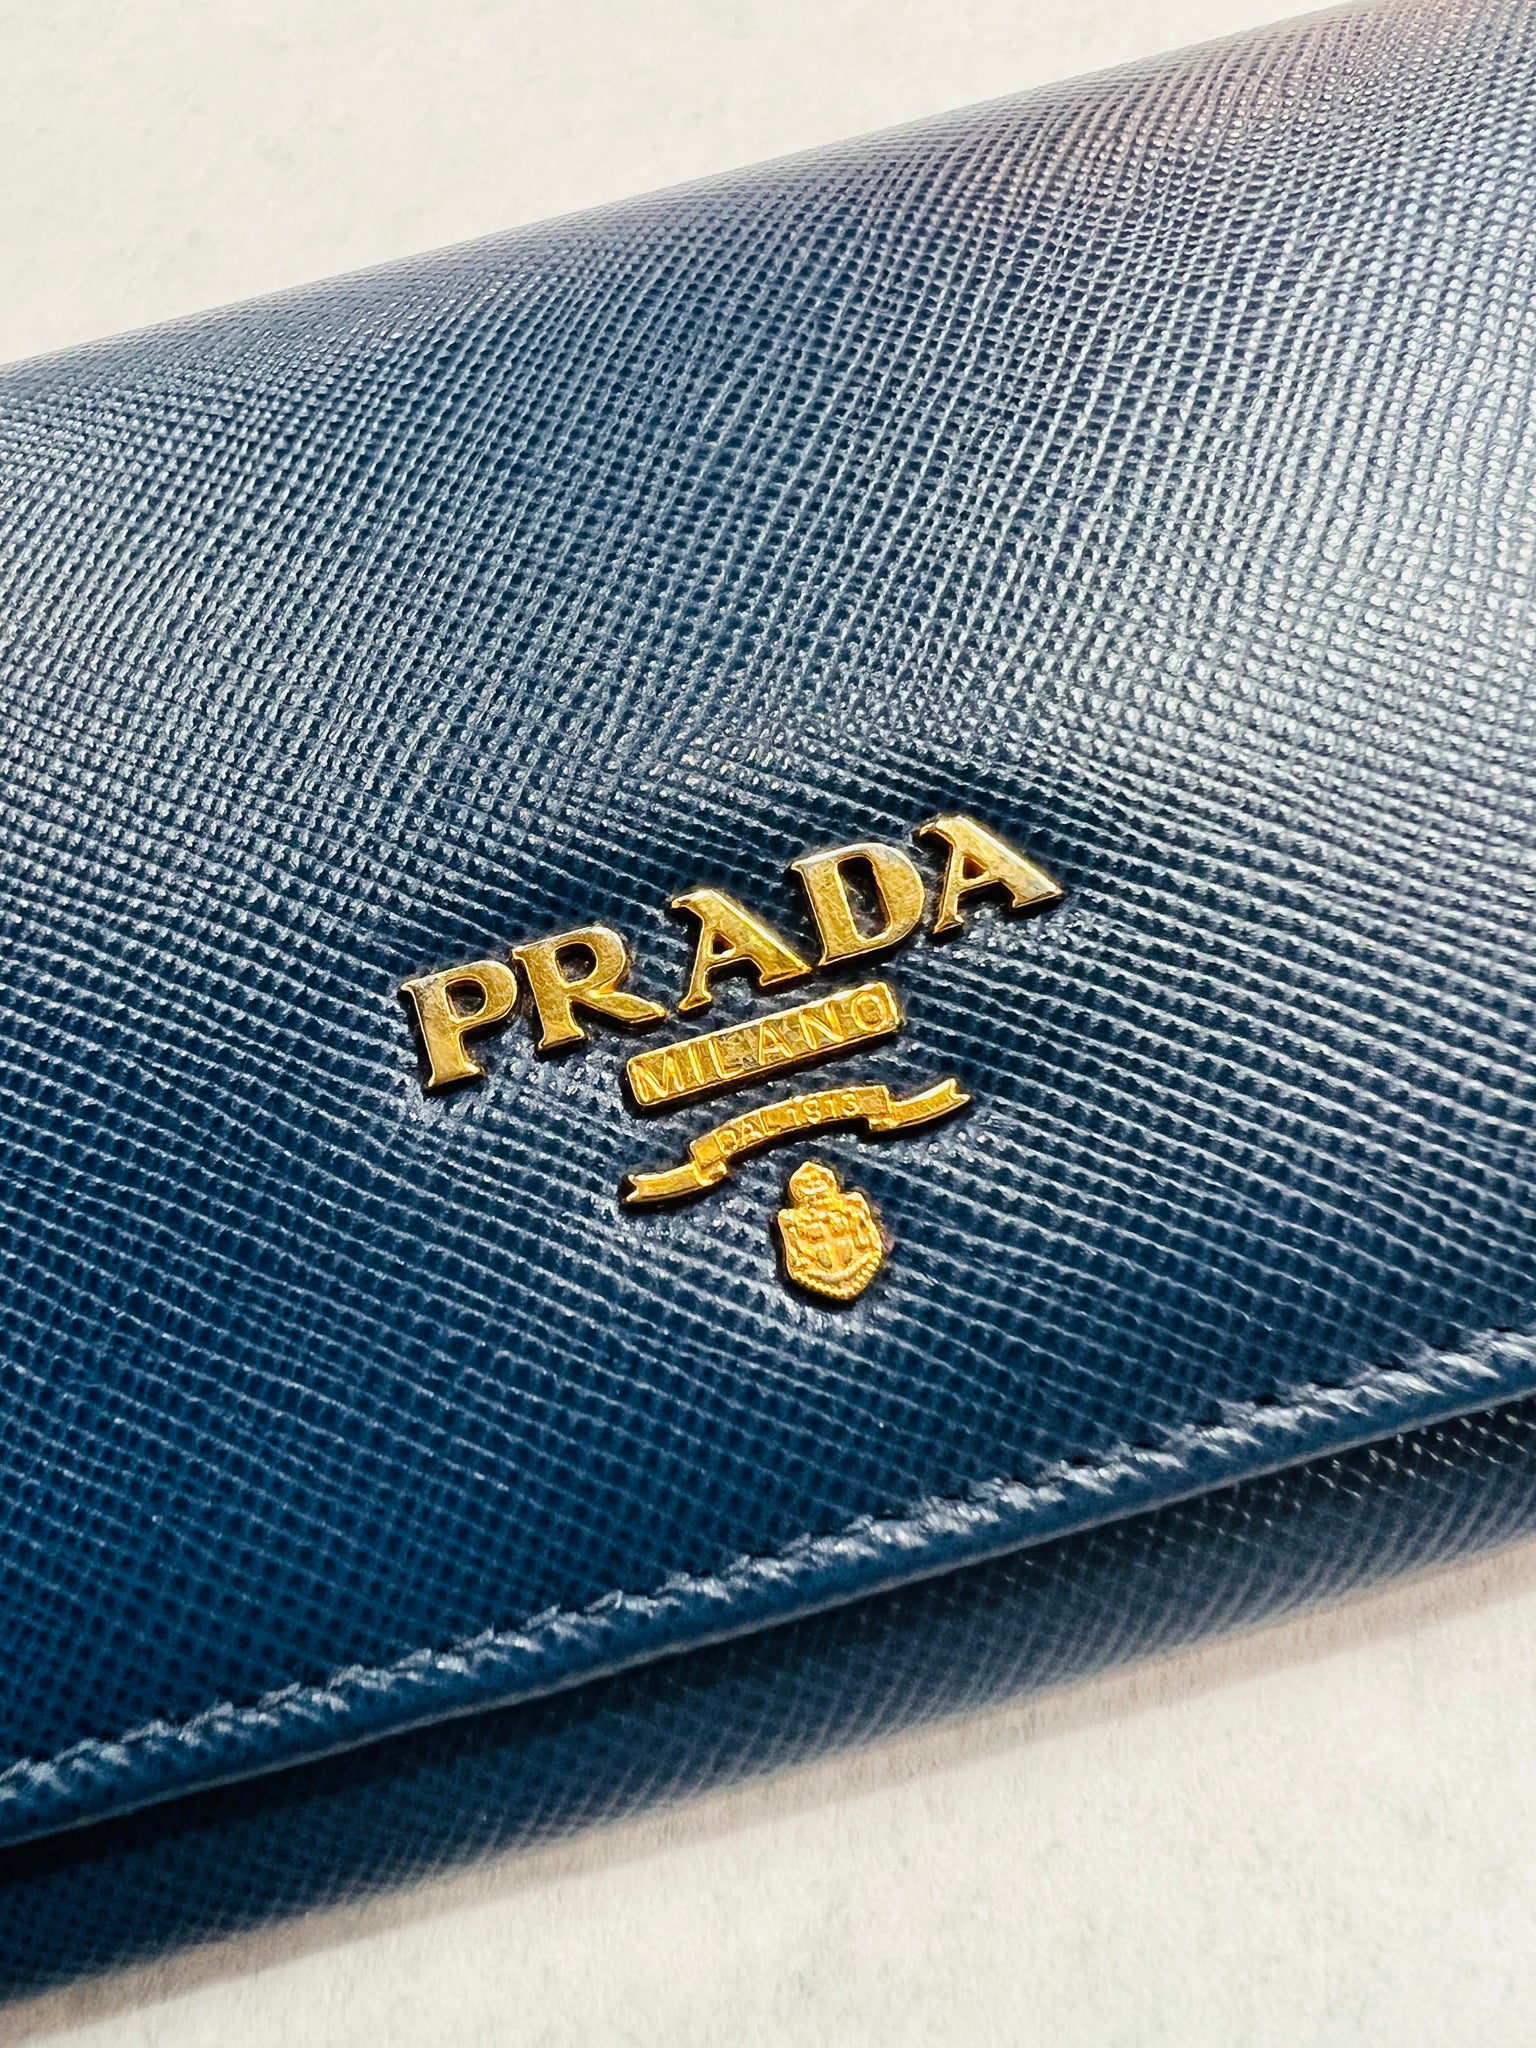 Authentic, pre-owned PRADA Blue Saffiano Leather Zippy Wallet